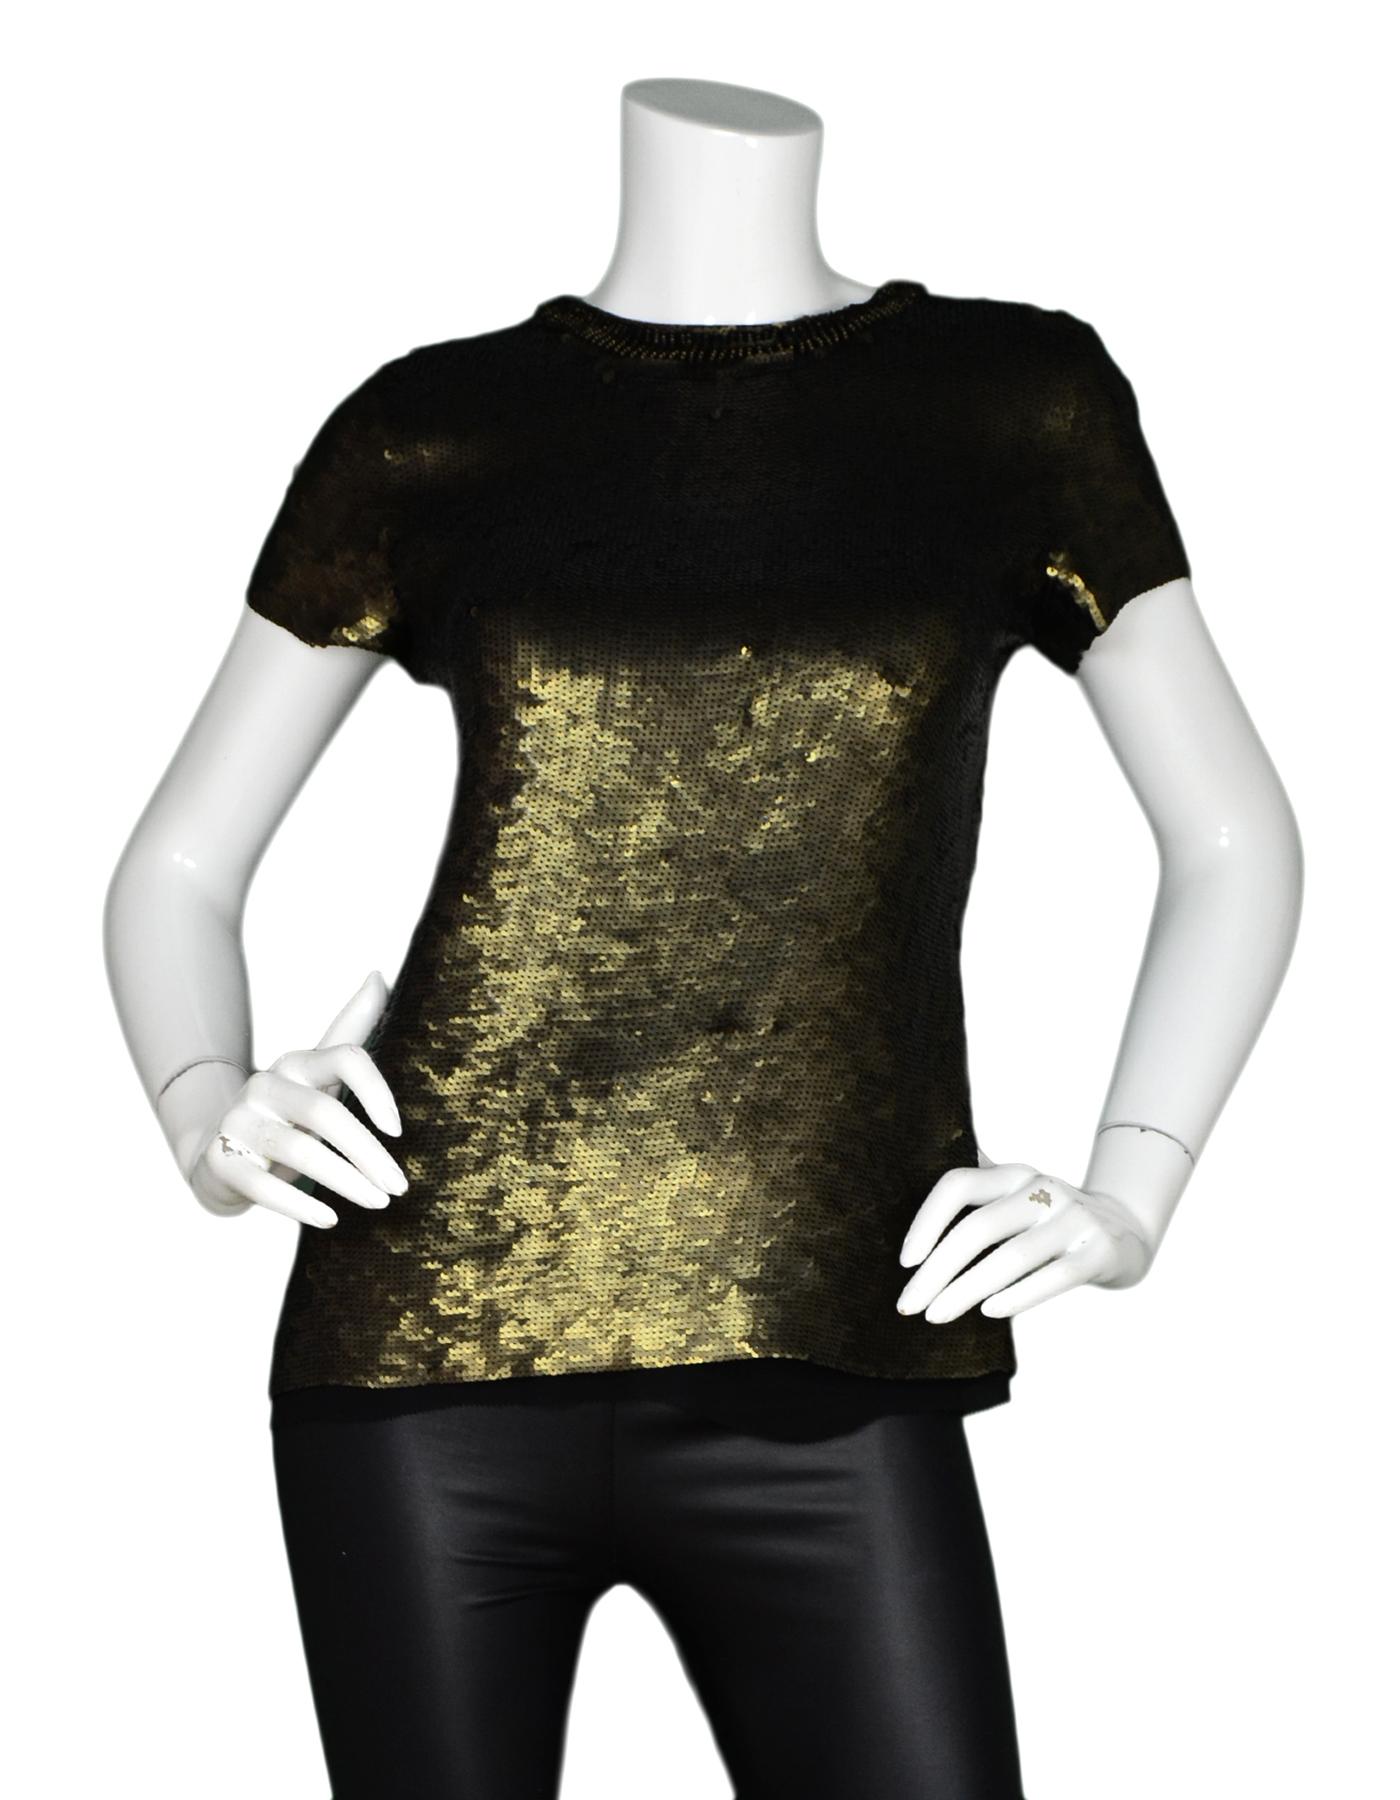 Proenza Schouler Copper Sequin Top Sz 2 NWT

Made In:  China
Color: Copper, black
Materials: Sequin 
Lining: 100% silk
Opening/Closure: Exposed full back zipper
Overall Condition: Excellent condition with original tags attached 
Estimated Retail: